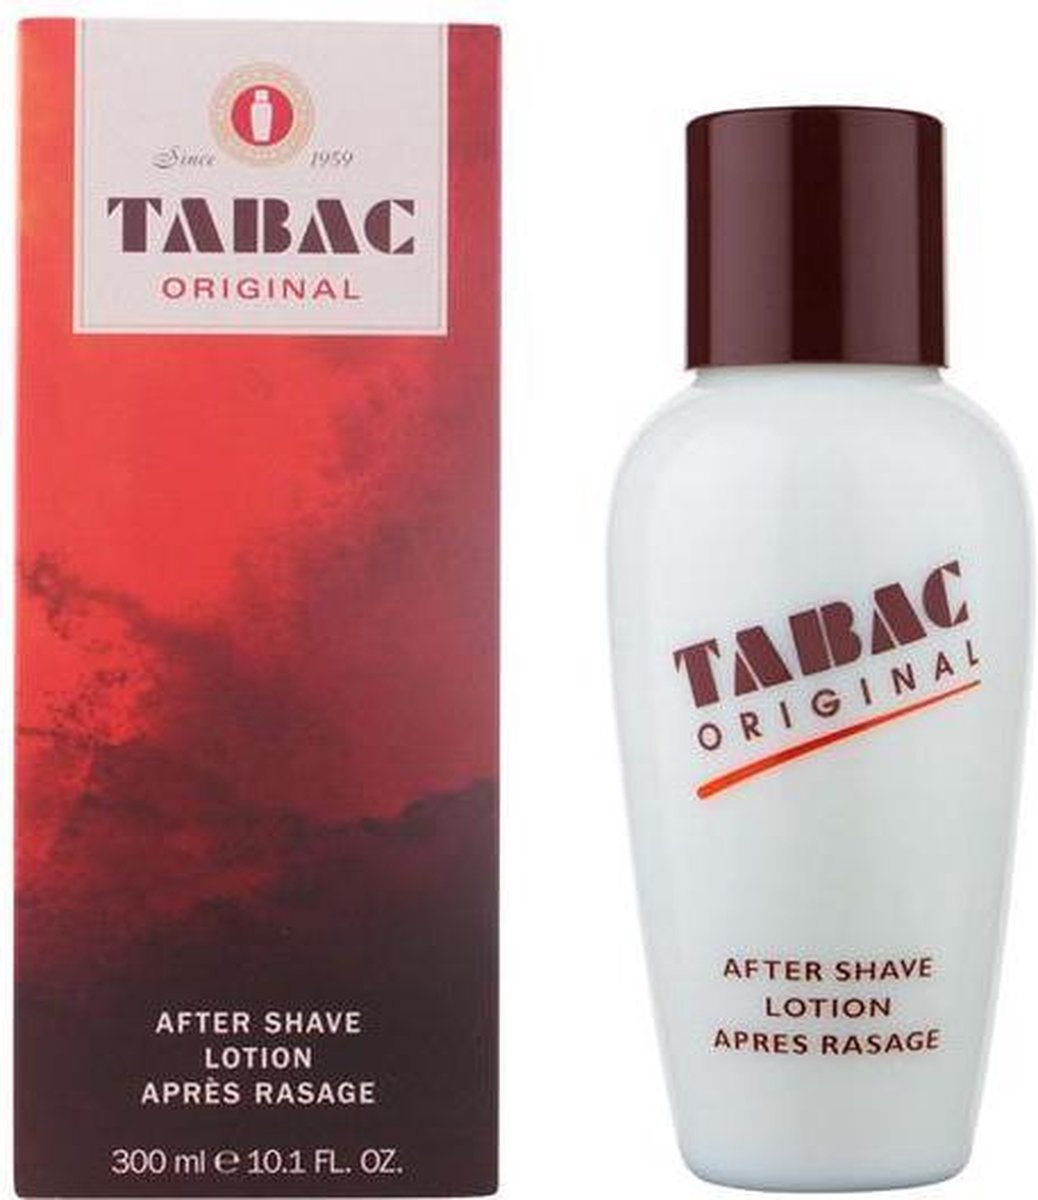 Tabac Original for - 75 ml - Aftershave lotion | bol.com